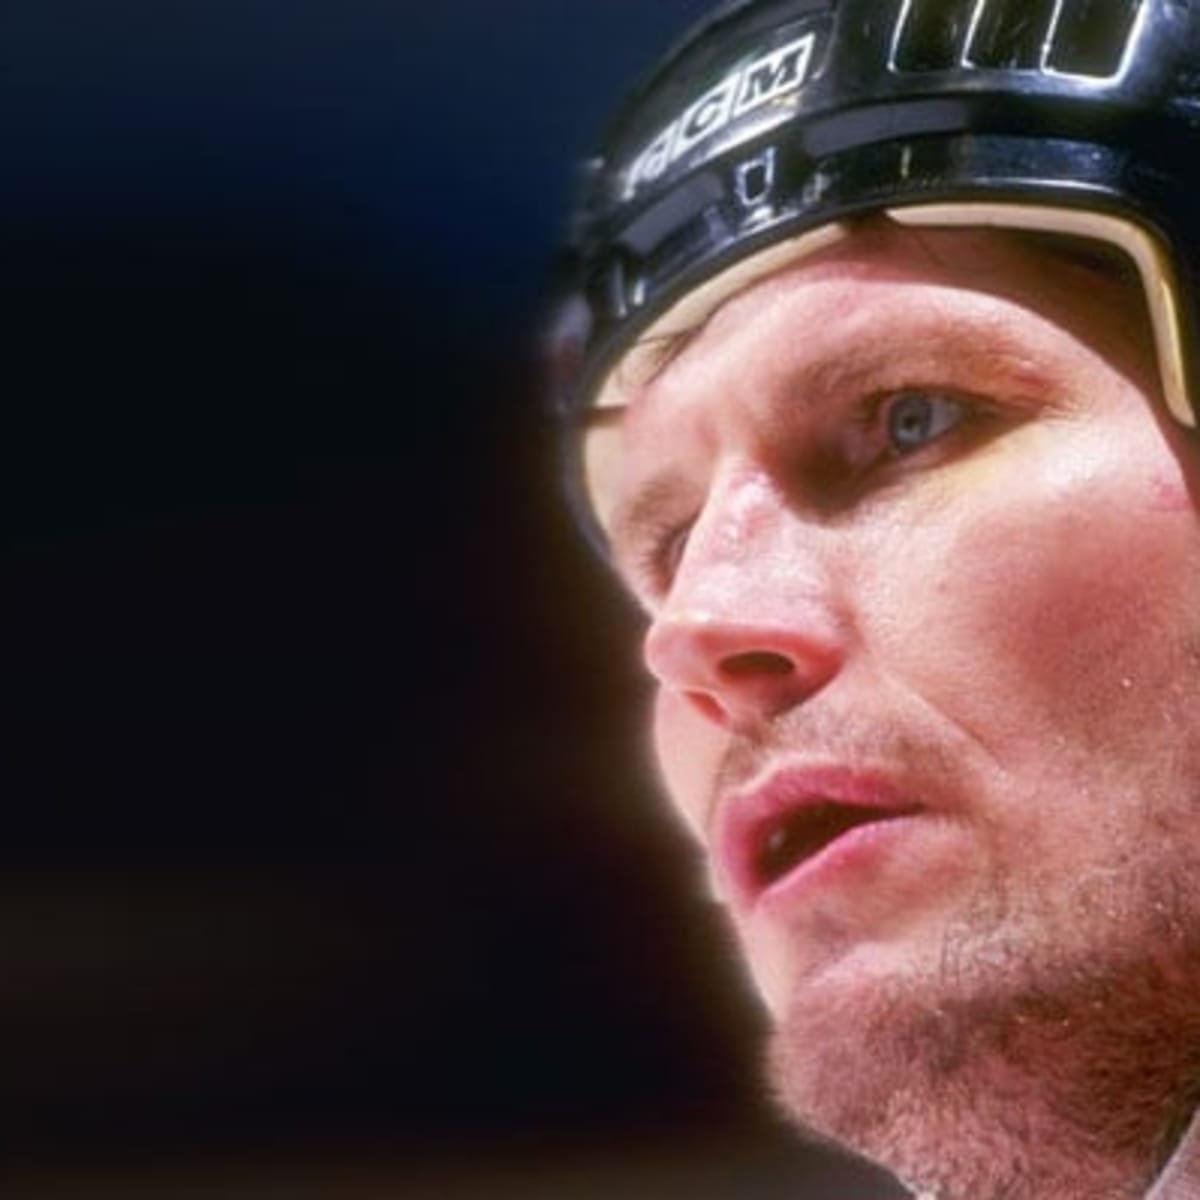 Former NHL tough guy Bob Probert dead at age 45 - The Globe and Mail